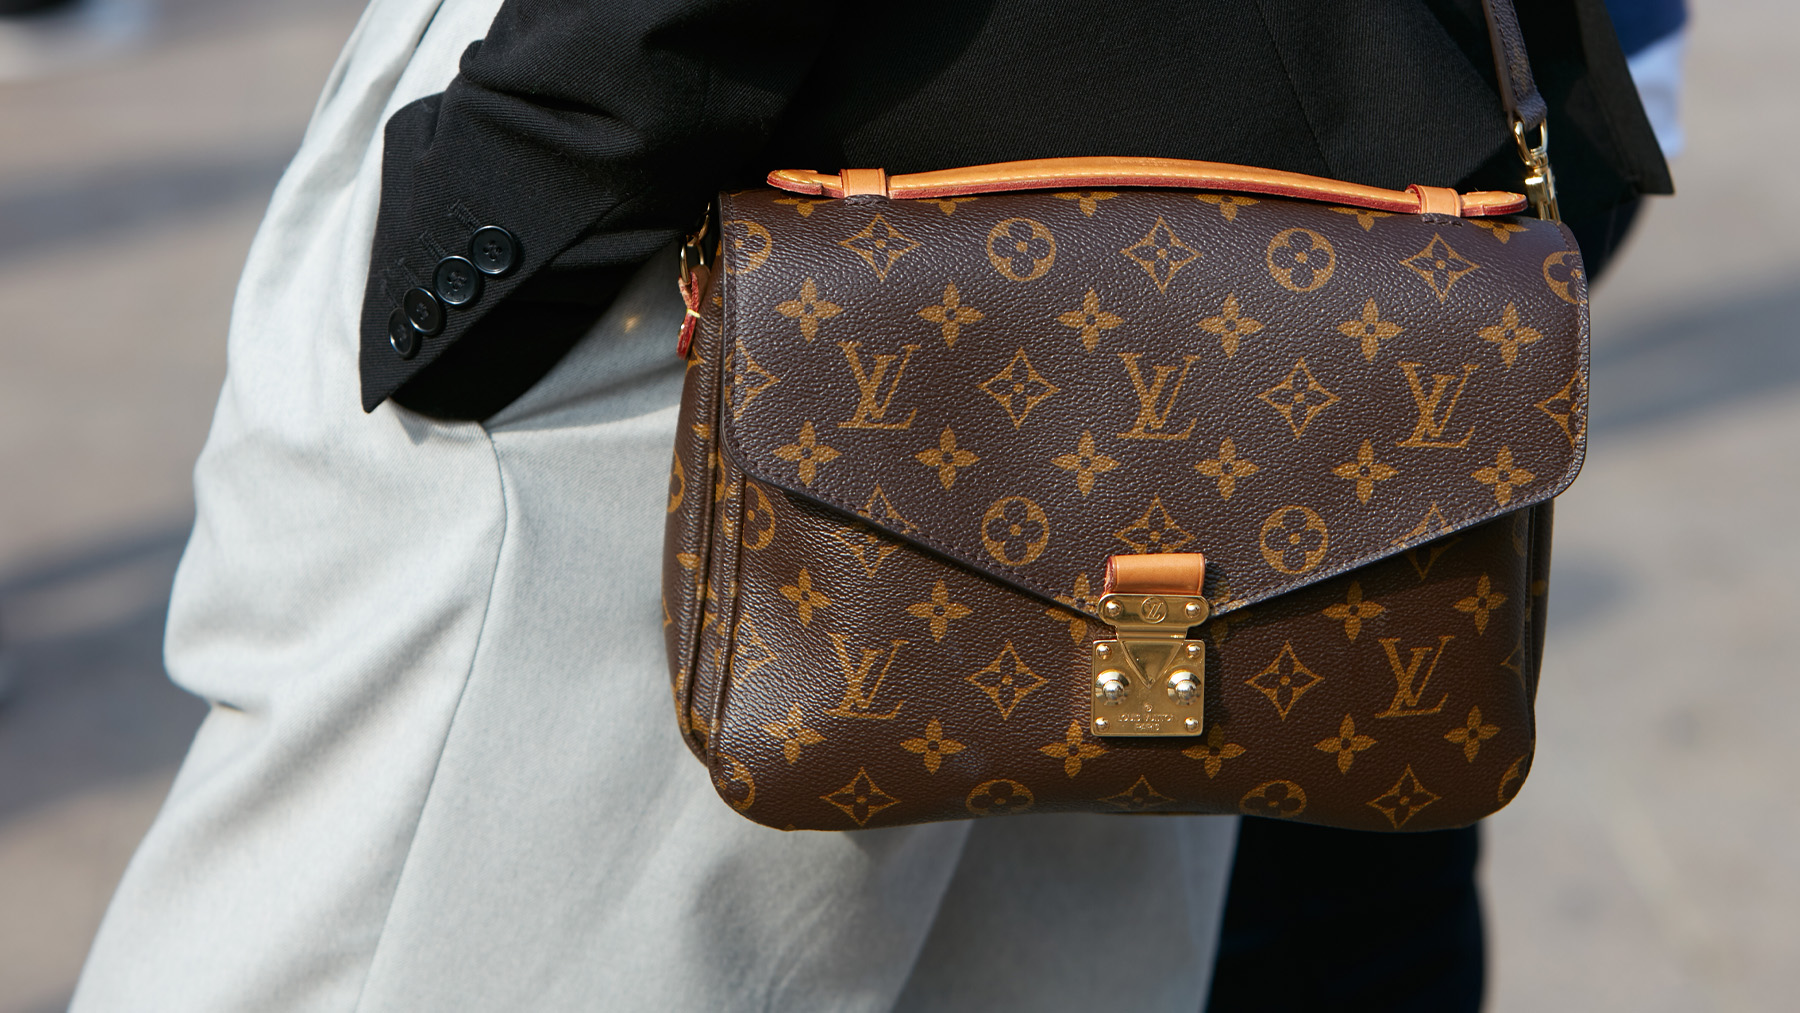 WHICH LOUIS VUITTON BAG IS THE MOST WORTH IT?, Galeri diposting oleh  Faznadia